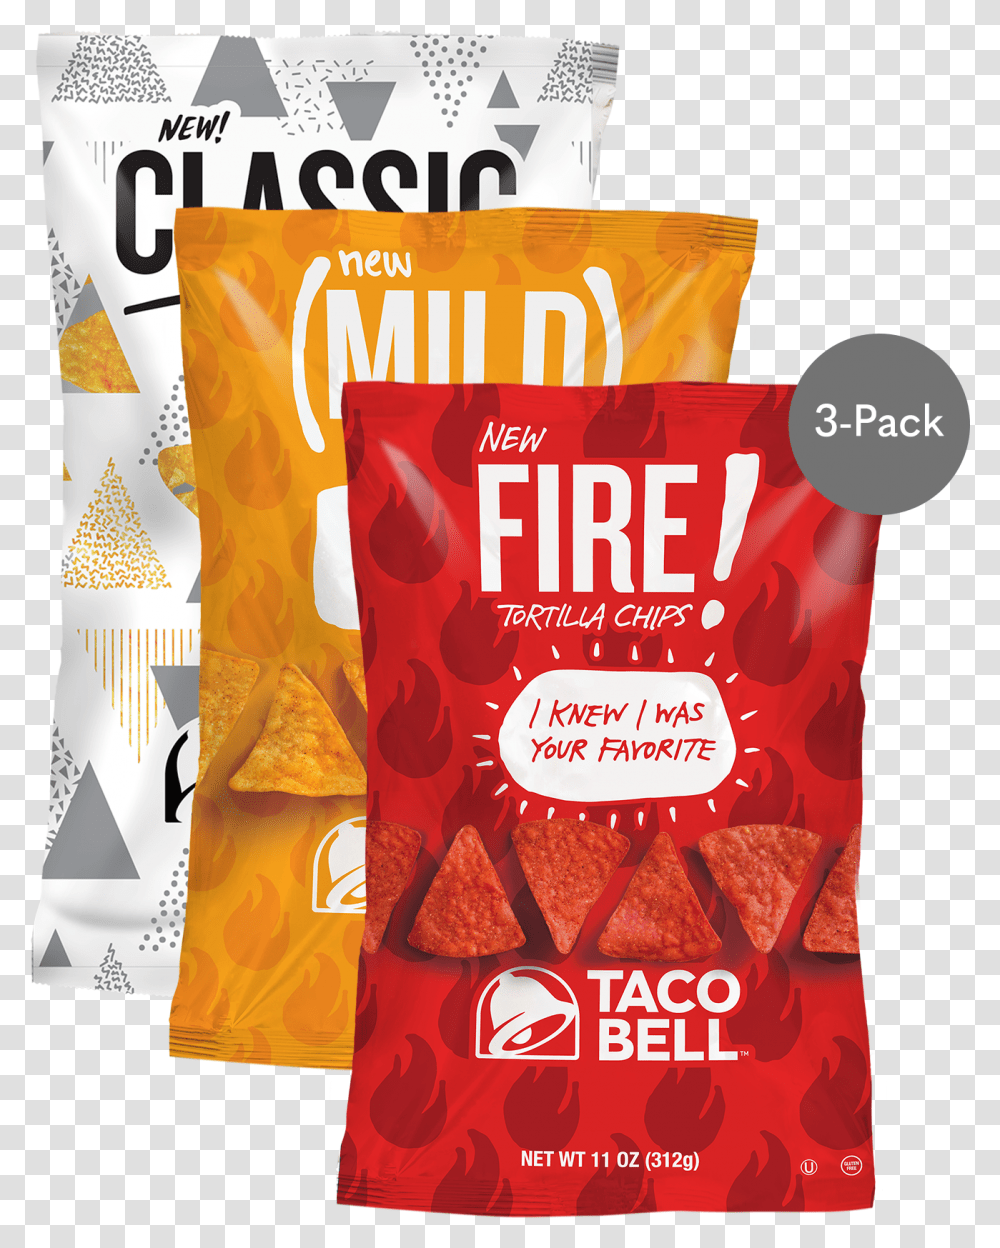 Download Taco Bell Chips Fire Image With No Background Taco Bell Sauce Packets, Advertisement, Poster, Flyer, Paper Transparent Png